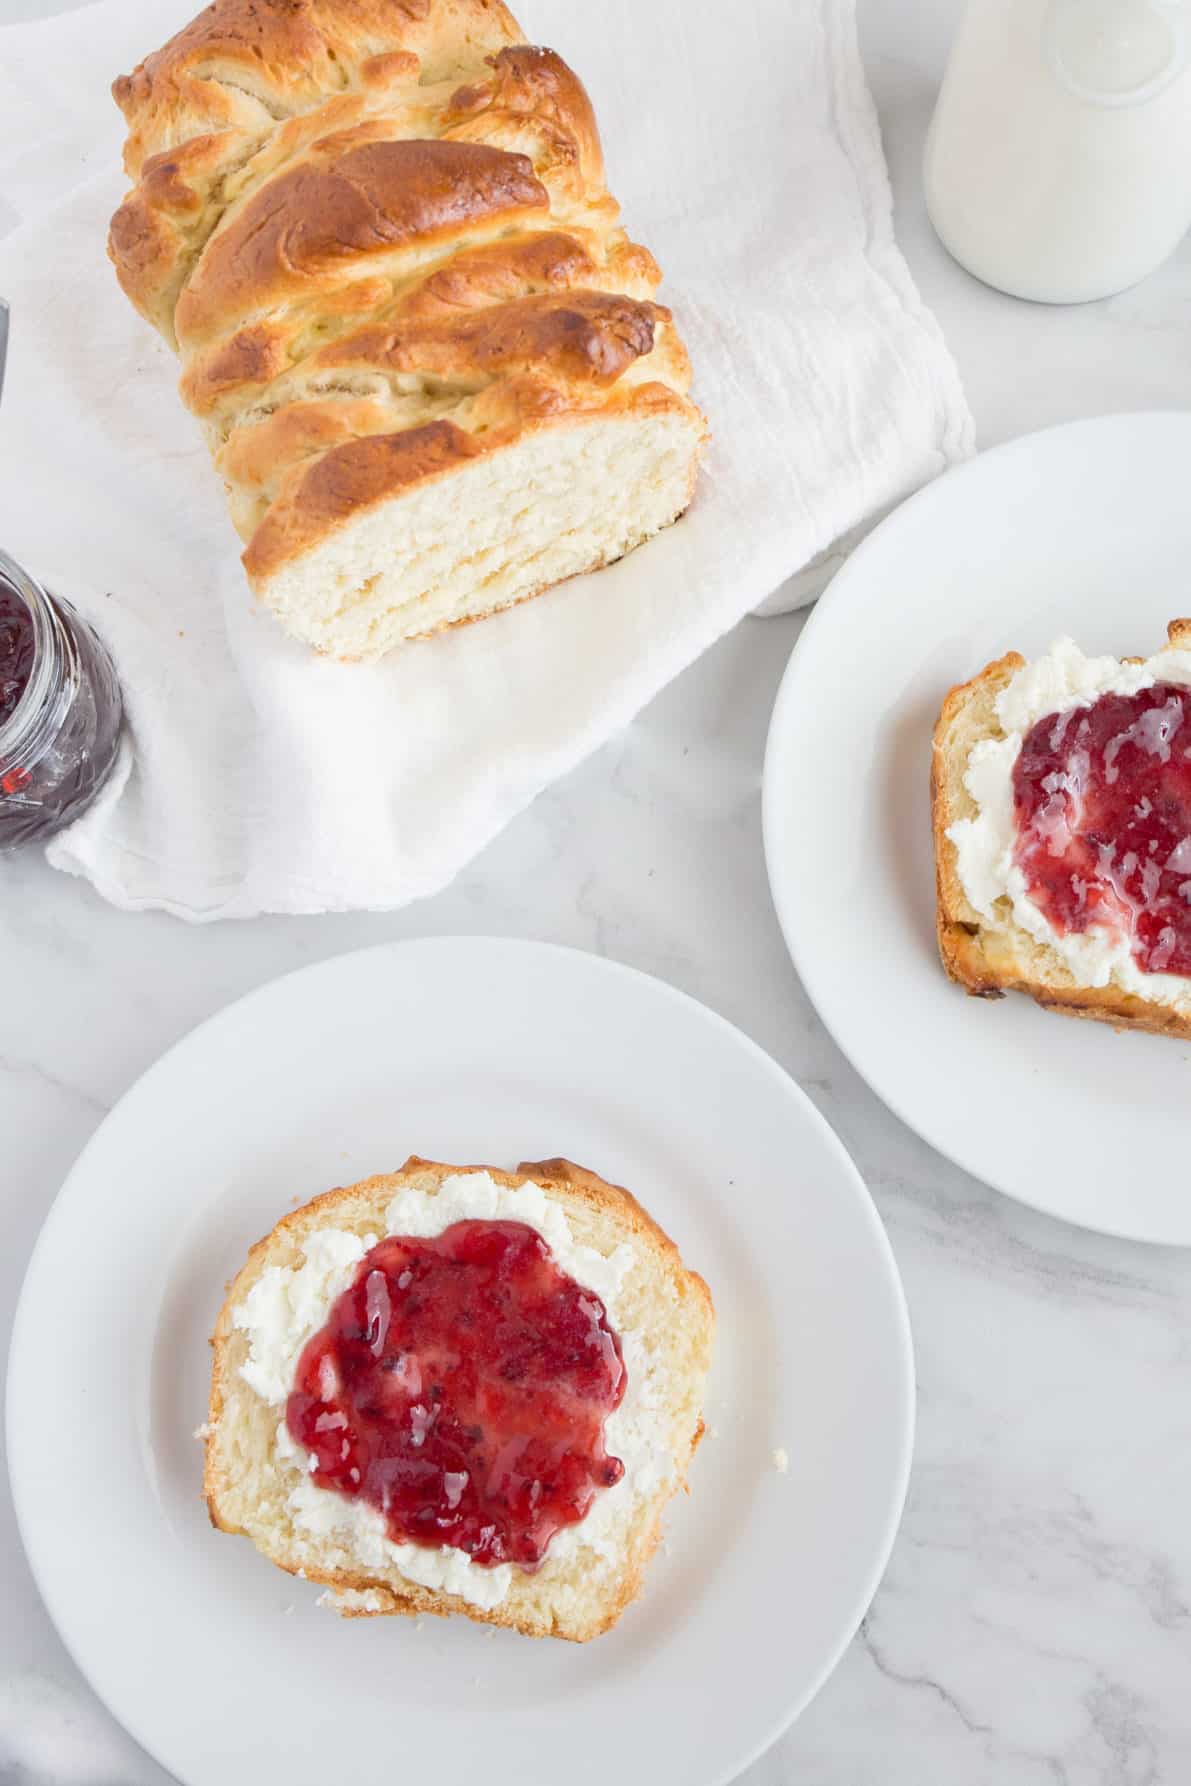 Slices of Brioche Bread topped with ricotta and jam.